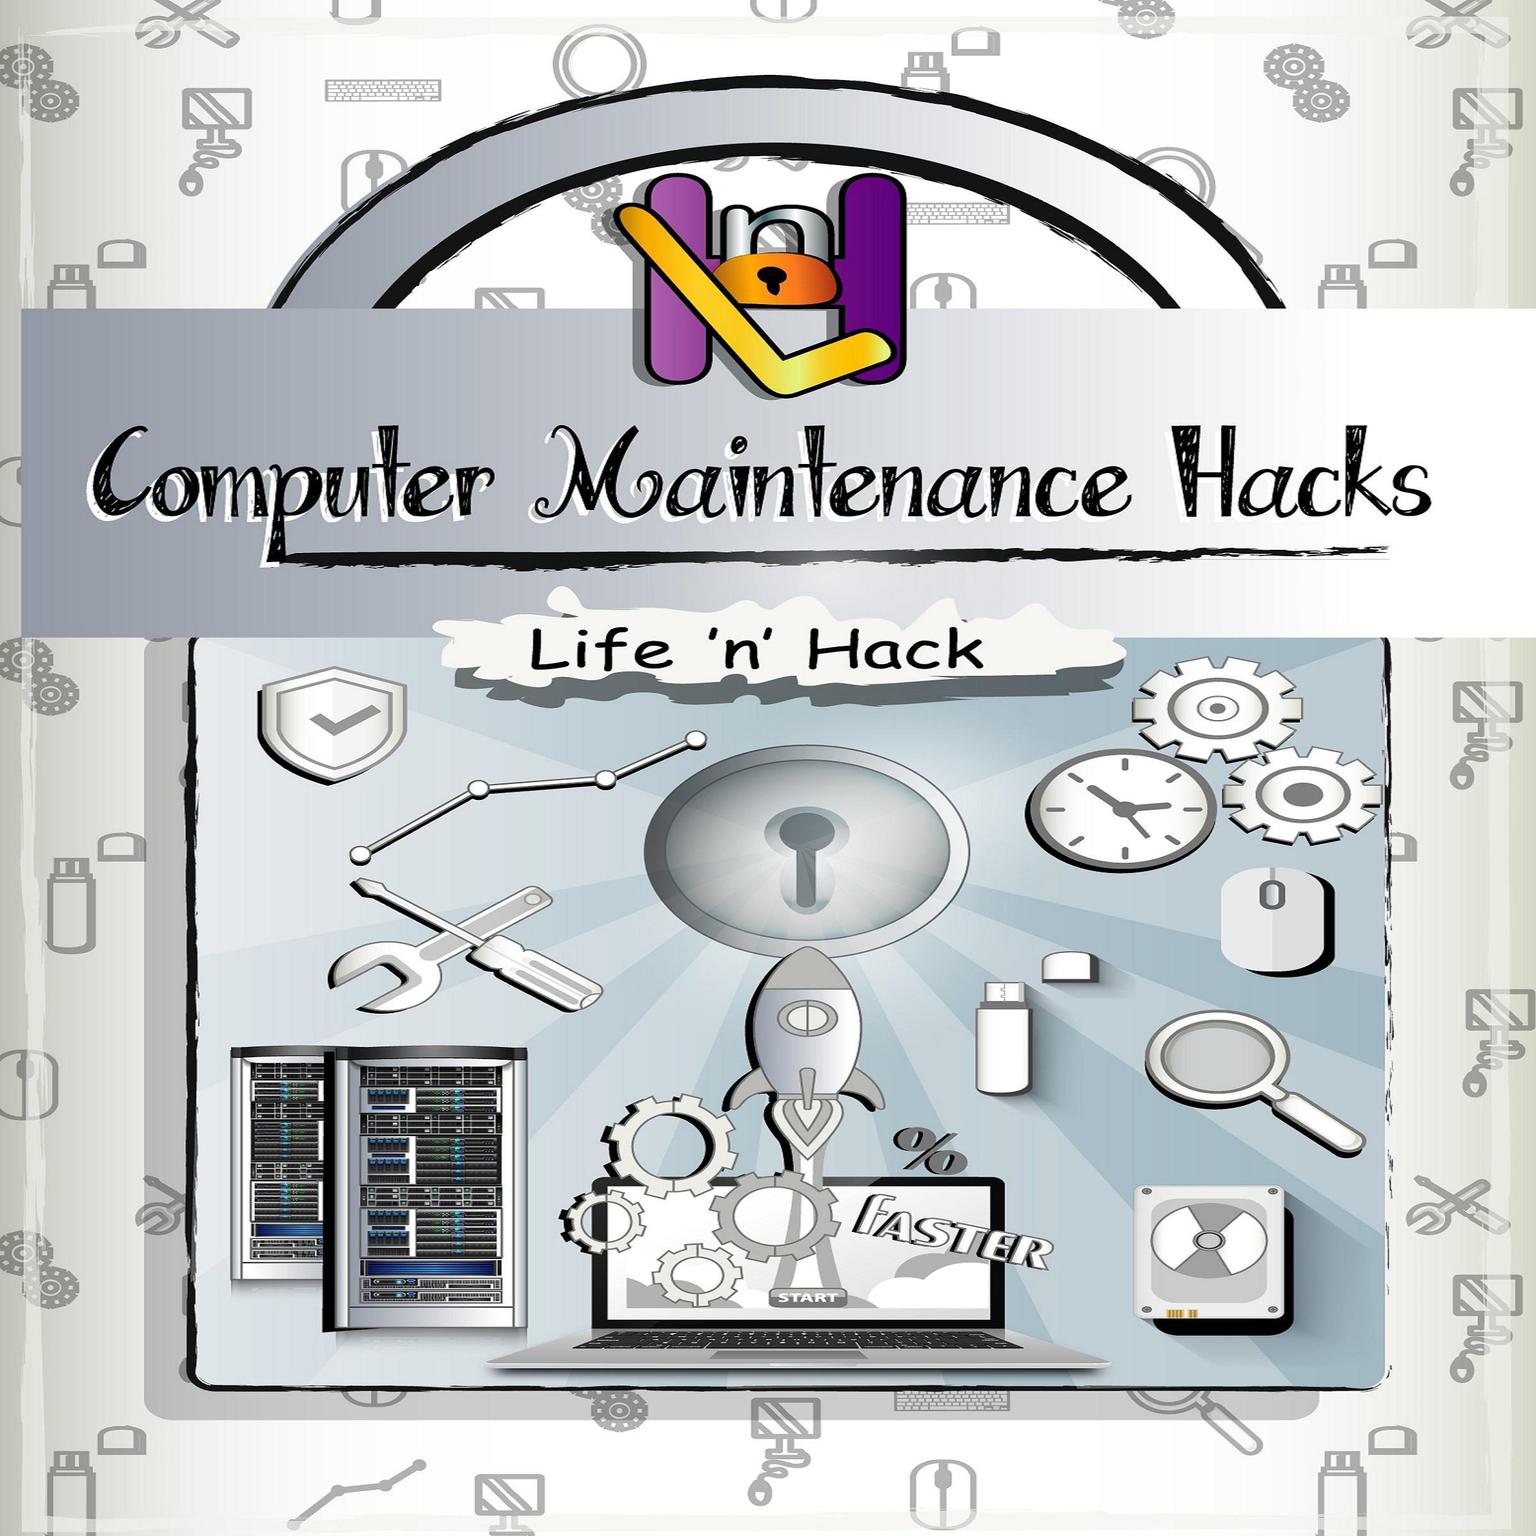 Computer Maintenance Hacks: 15 Simple Practical Hacks to Optimize, Speed Up, and Make Computer Faster Audiobook, by Life 'n’ Hack